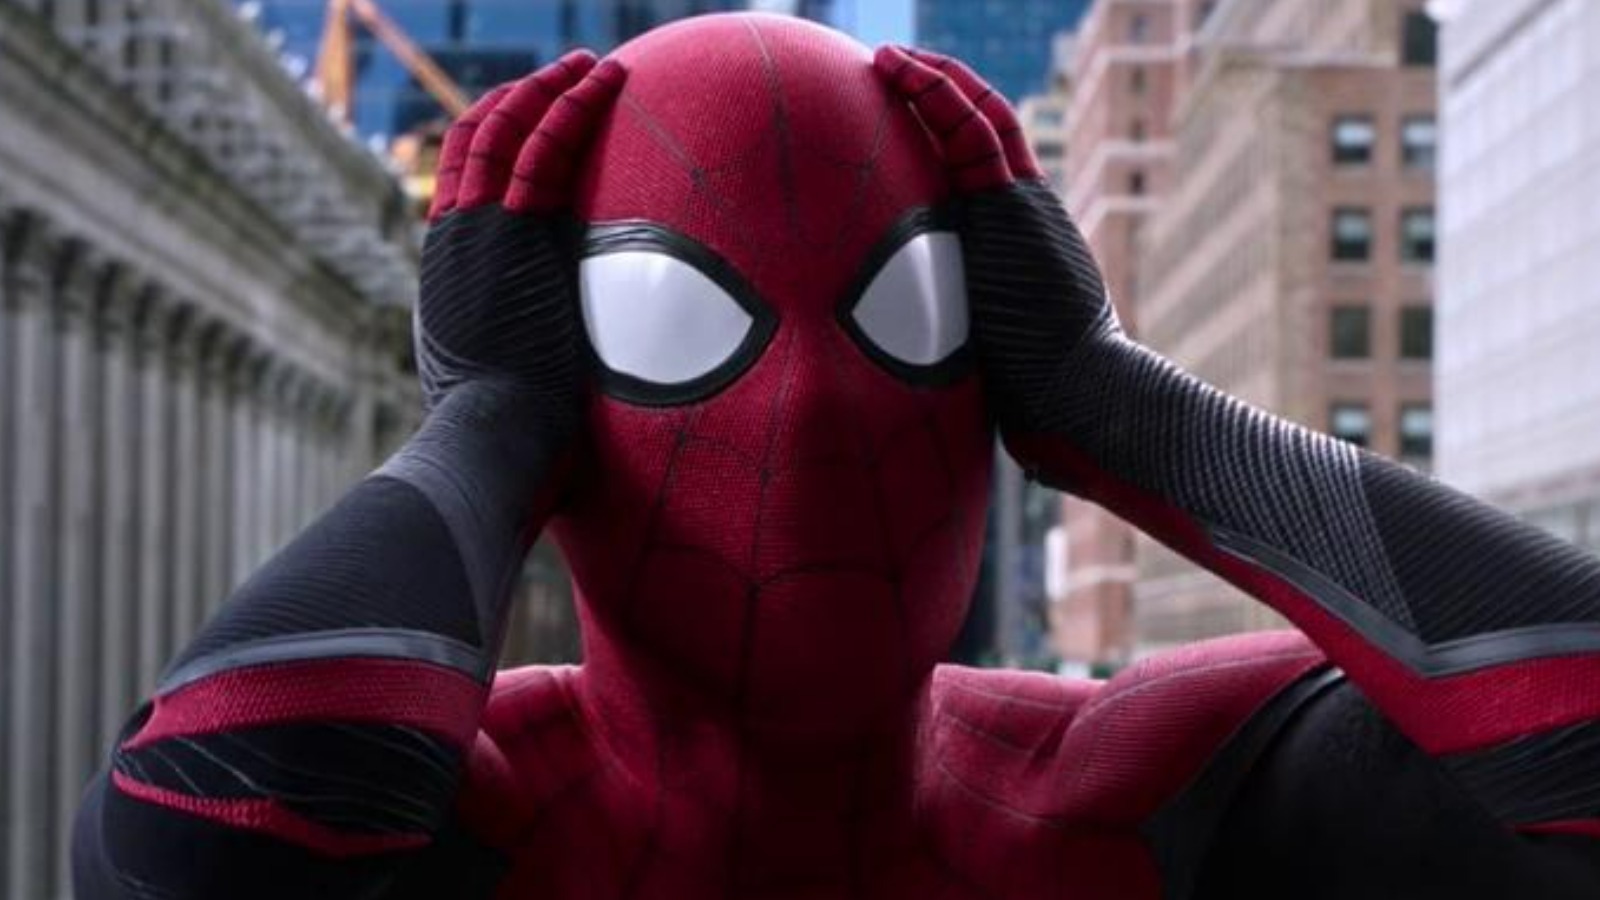 Ranking Spider-Man Movies By How Much Money They Made At The Box Office